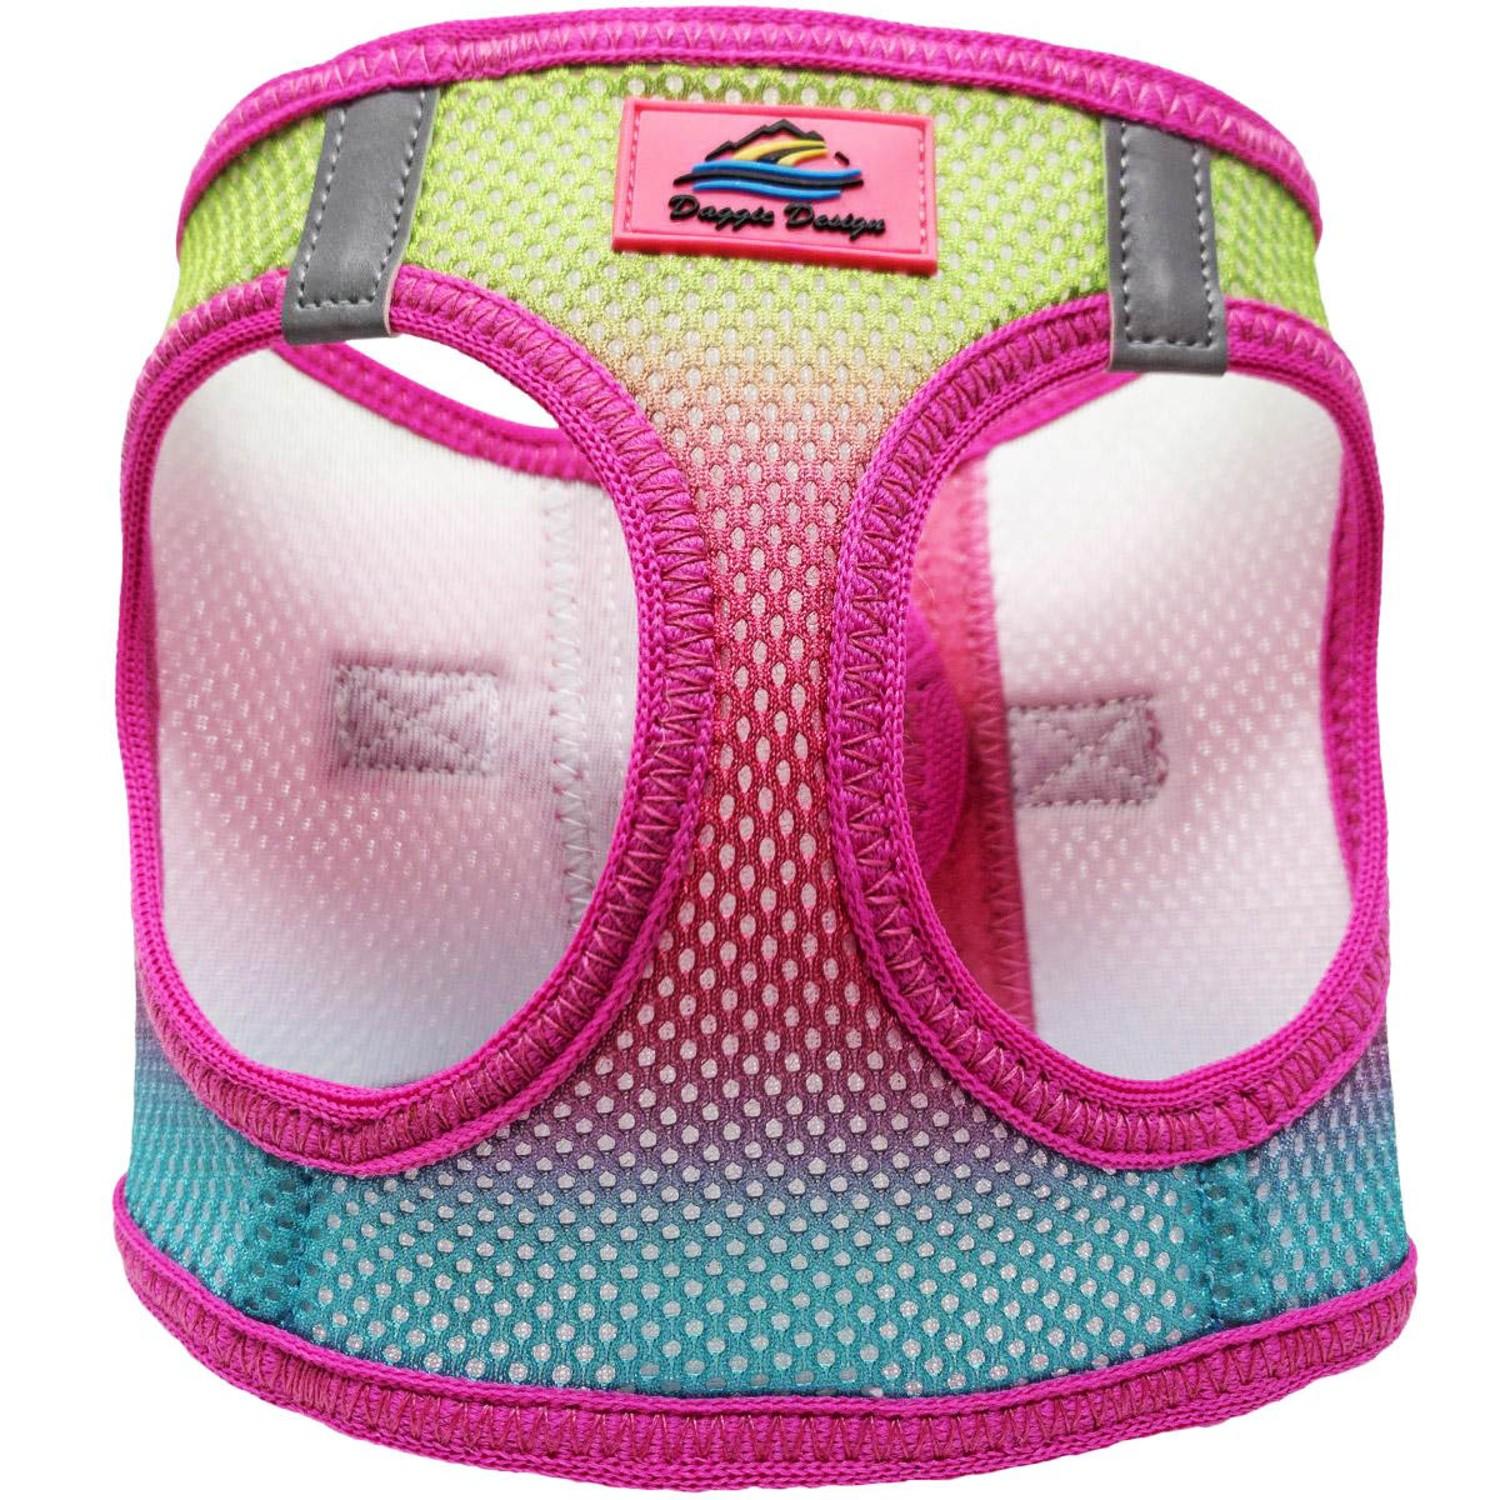 American River Choke-Free Dog Harness by Doggie Design - Cotton Candy Ombre